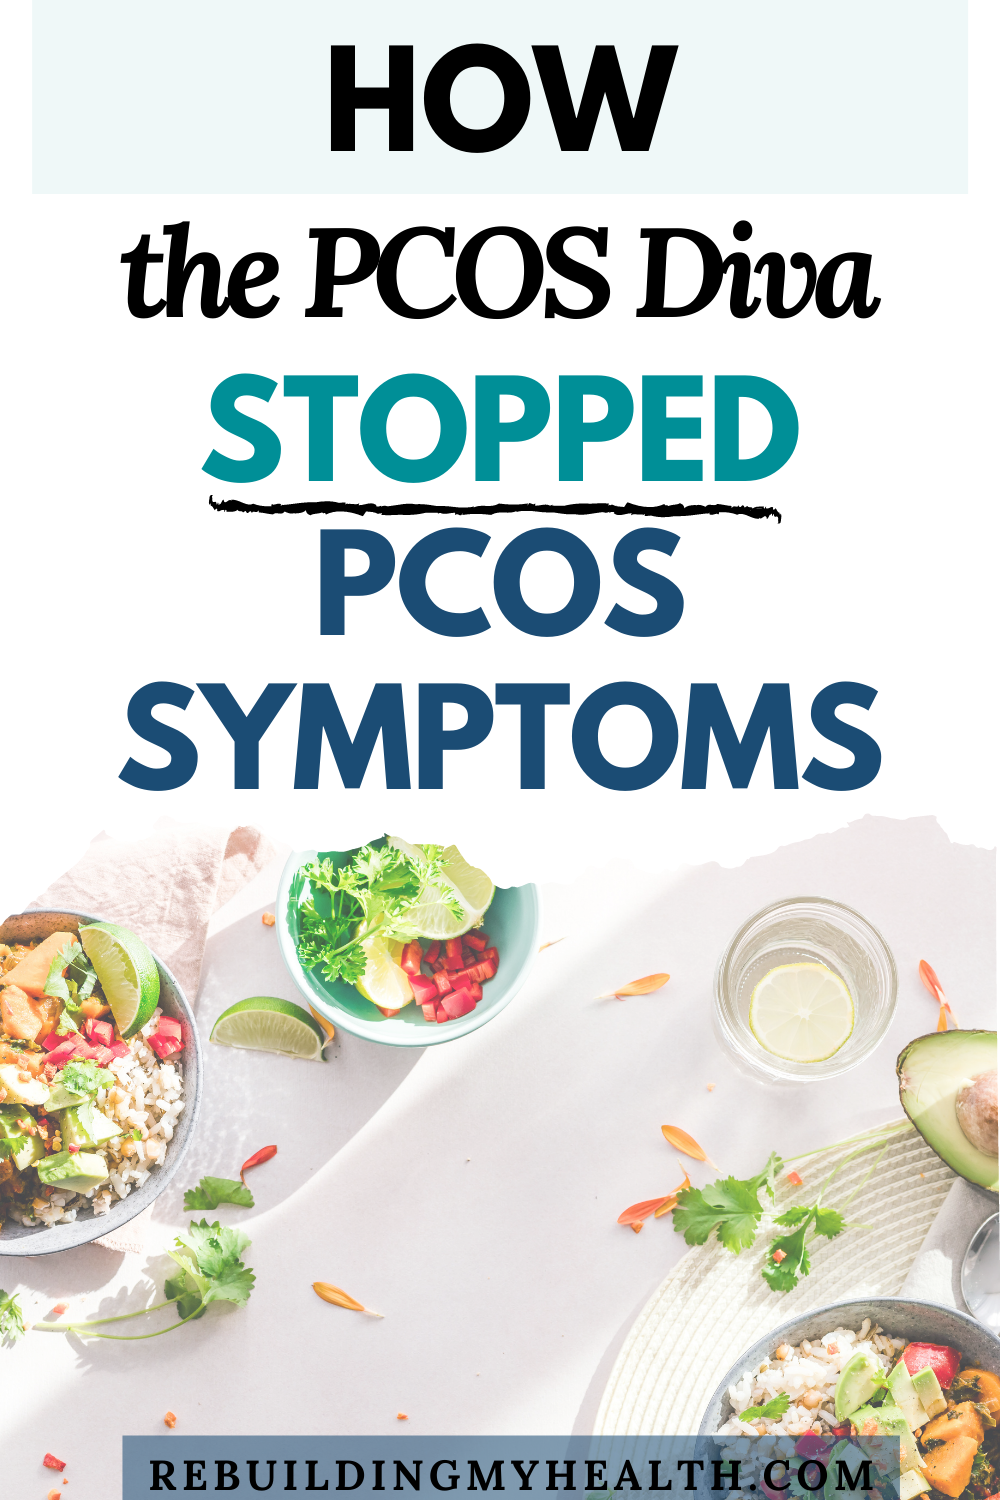 How the PCOS Diva stopped PCOS symptoms naturally with diet, blood sugar regulation, exercise and better sleep